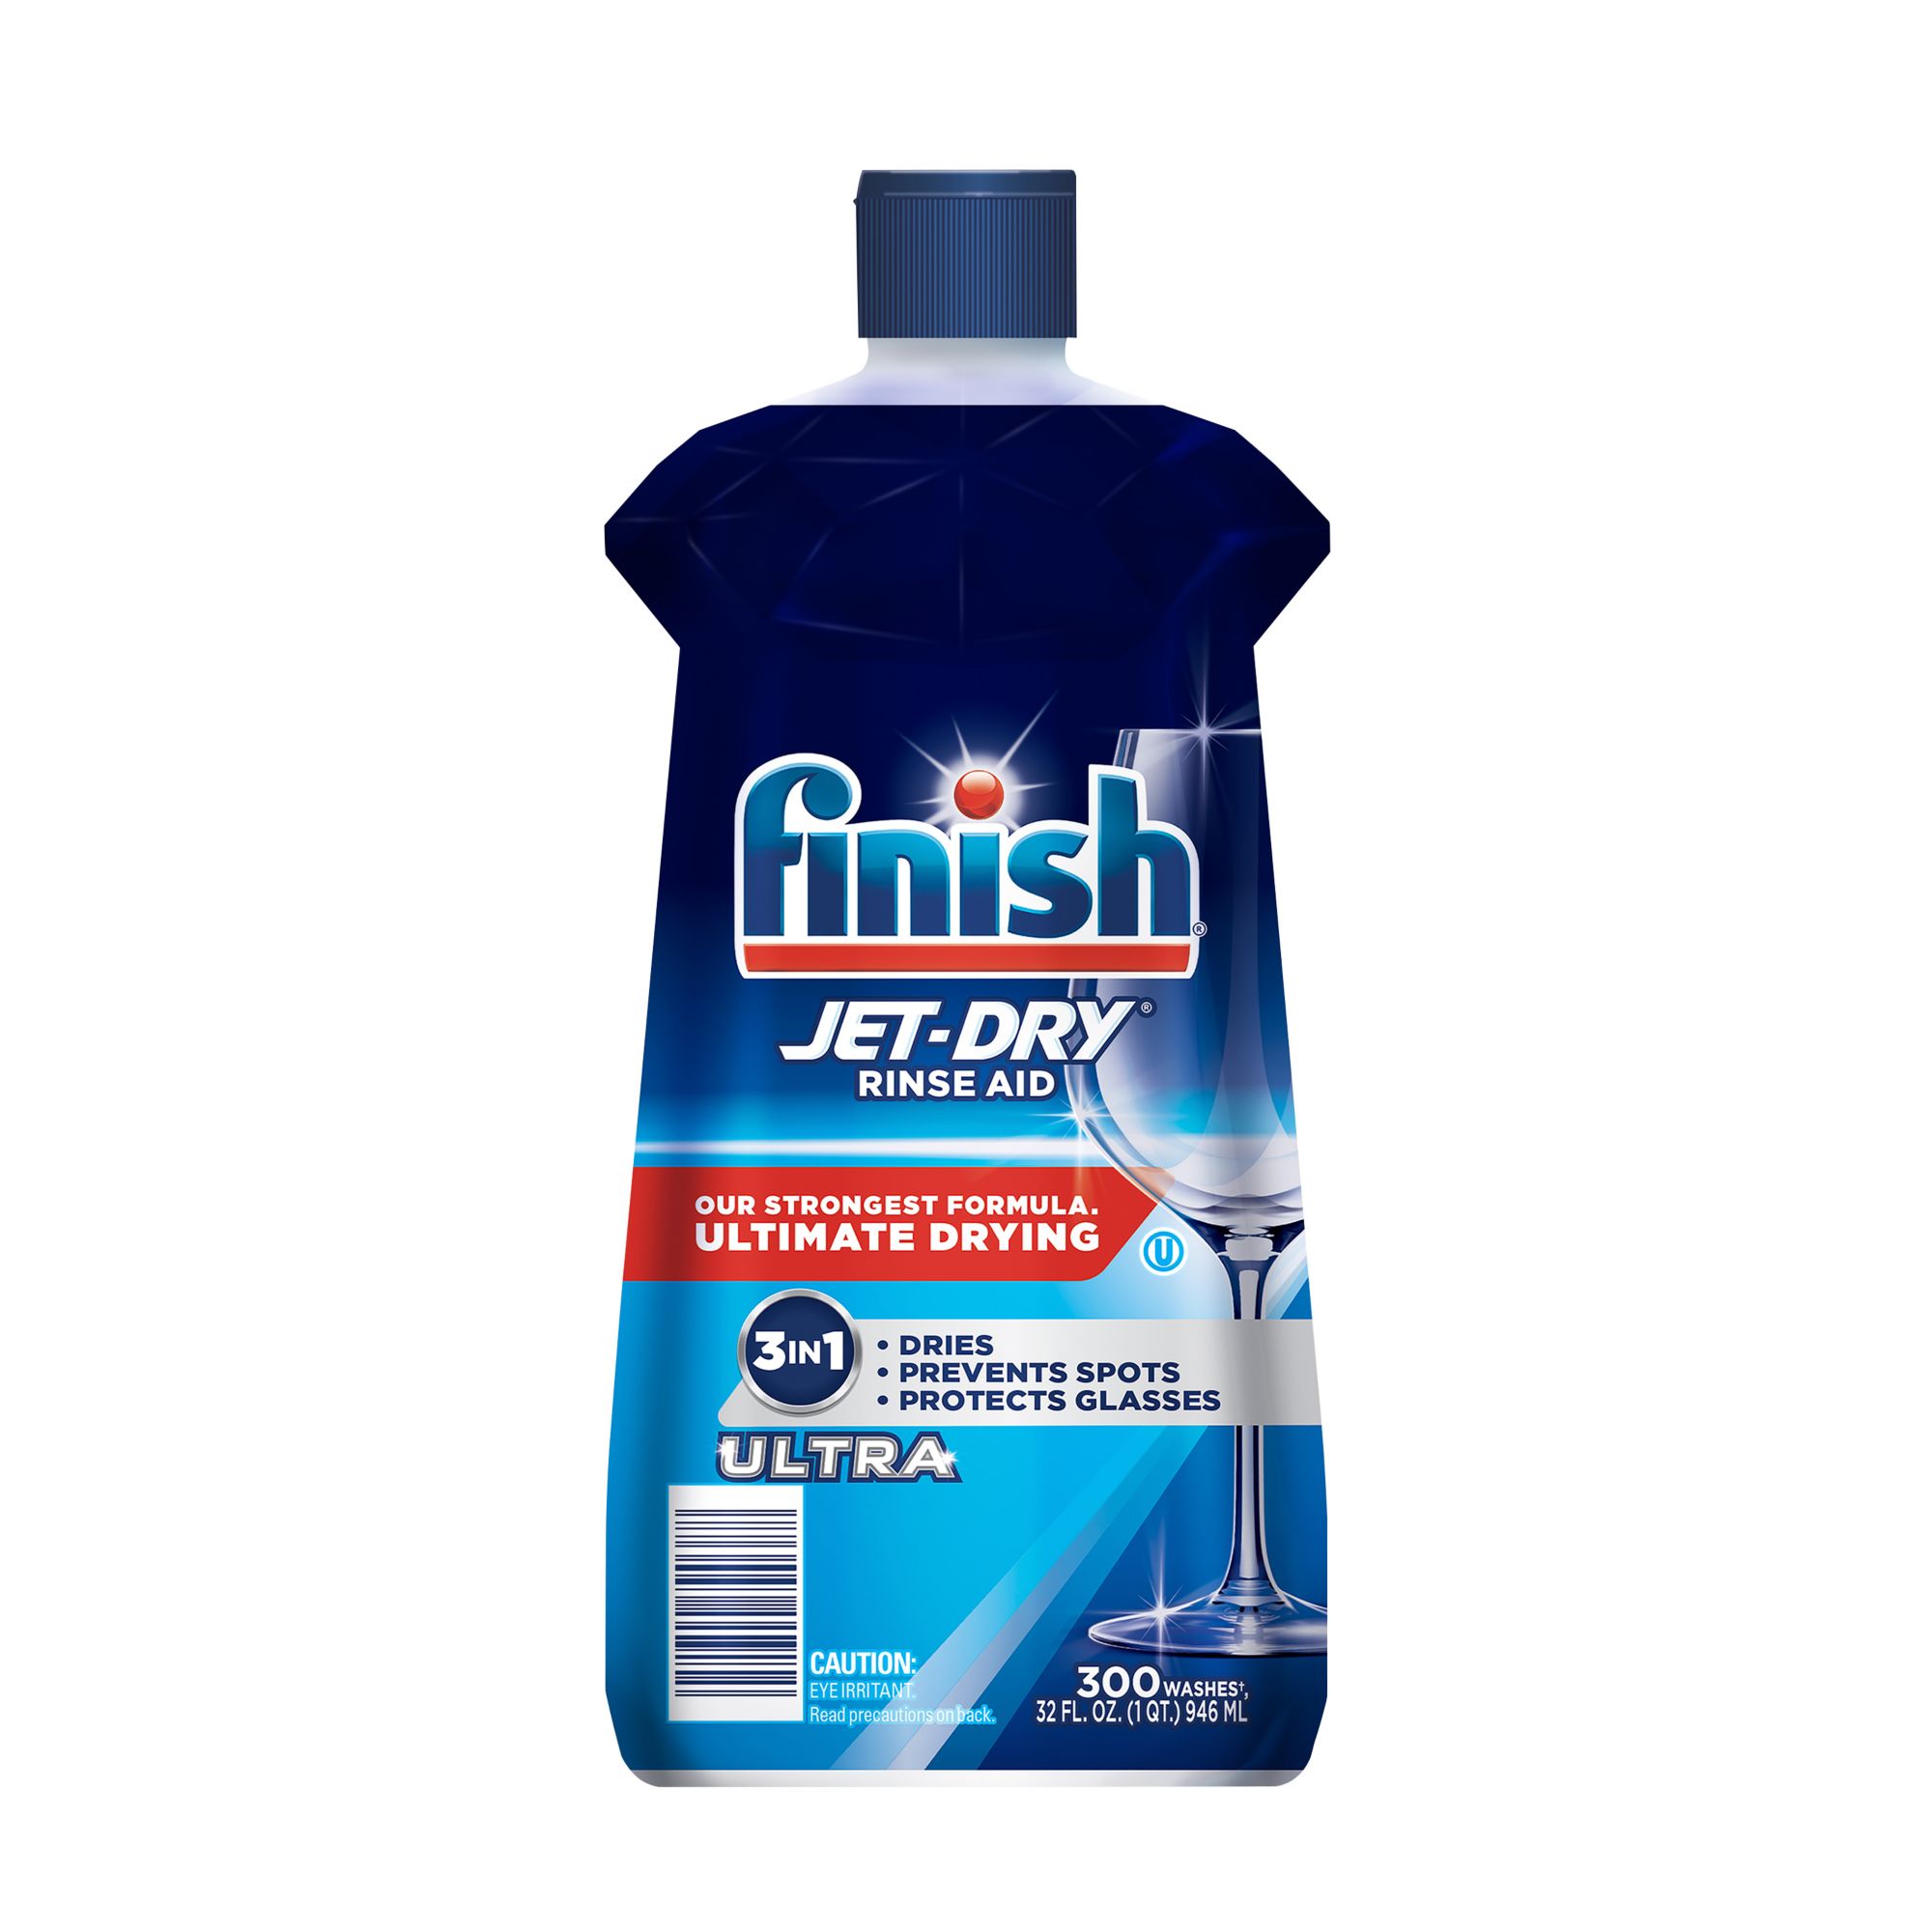 Finish Jet-dry, Rinse Agent Liquid, Ounce Blue 32 Fl Oz (Packaging May  Vary), Citrus